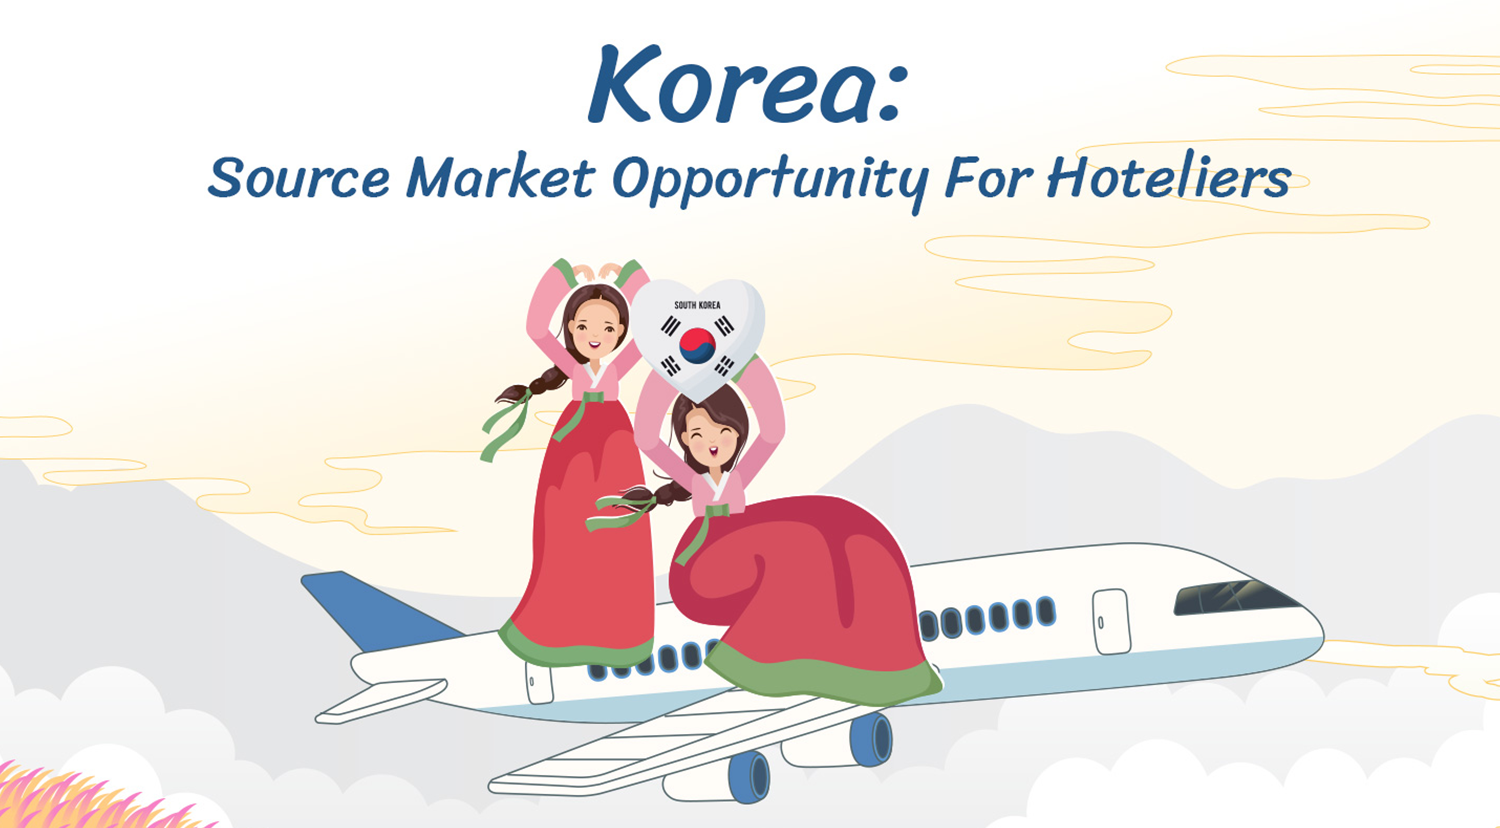 Korea: Source Market Opportunity For Hoteliers